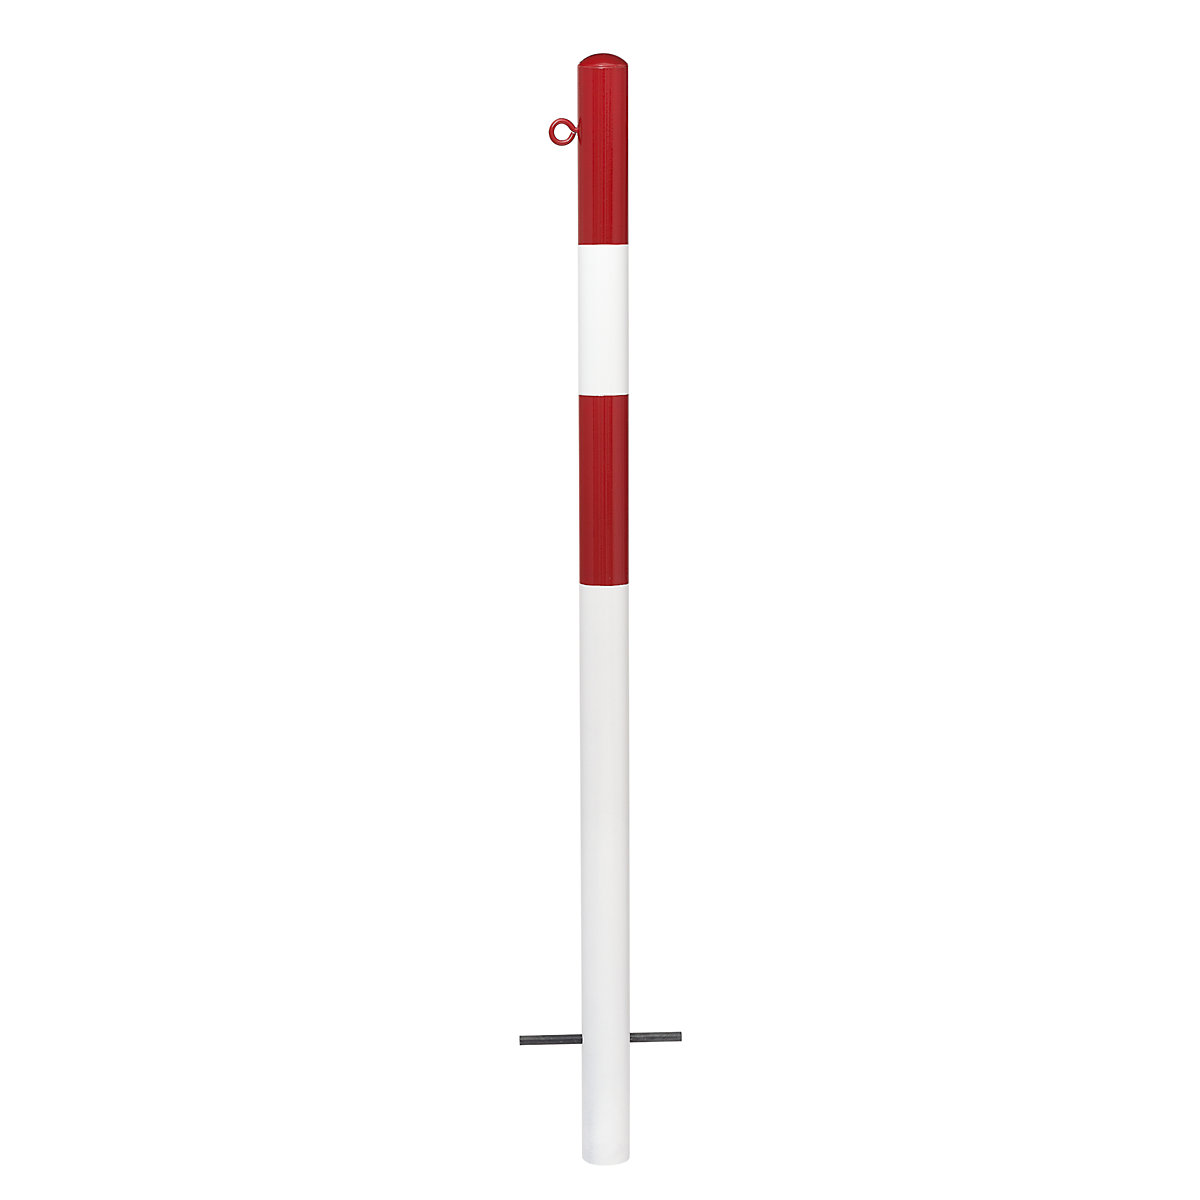 Barrier post, for setting in concrete, Ø 60 mm, red/white plastic coated, 1 eyelet-10